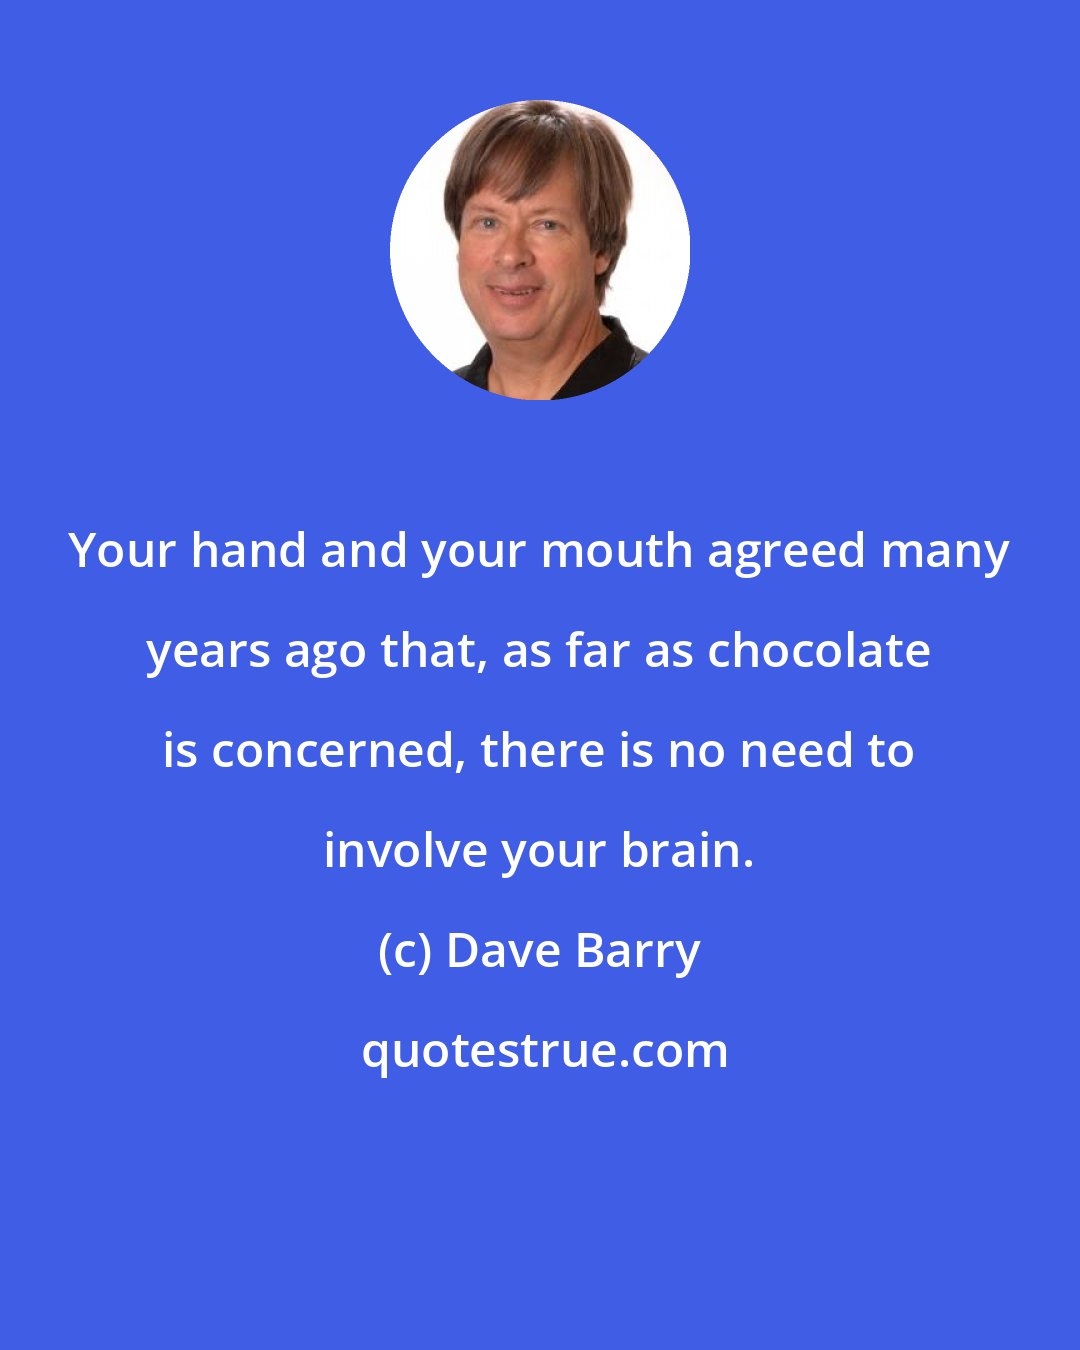 Dave Barry: Your hand and your mouth agreed many years ago that, as far as chocolate is concerned, there is no need to involve your brain.